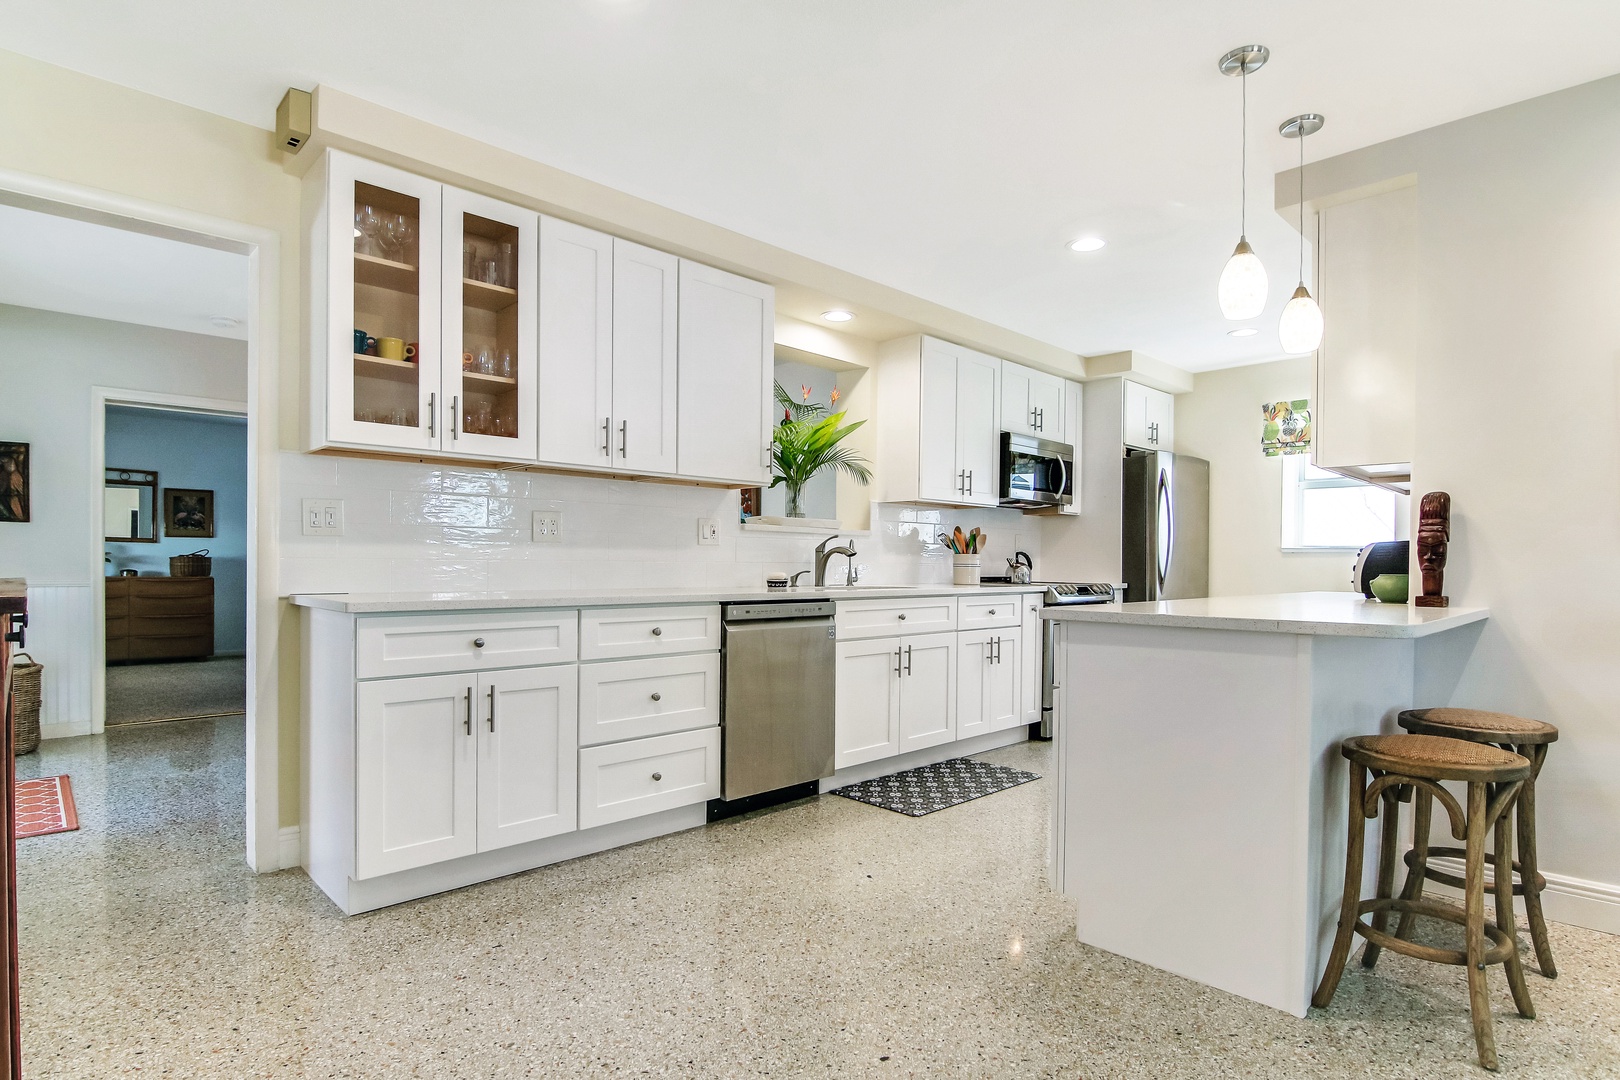 The bright, cheerful kitchen offers ample space & all the comforts of home